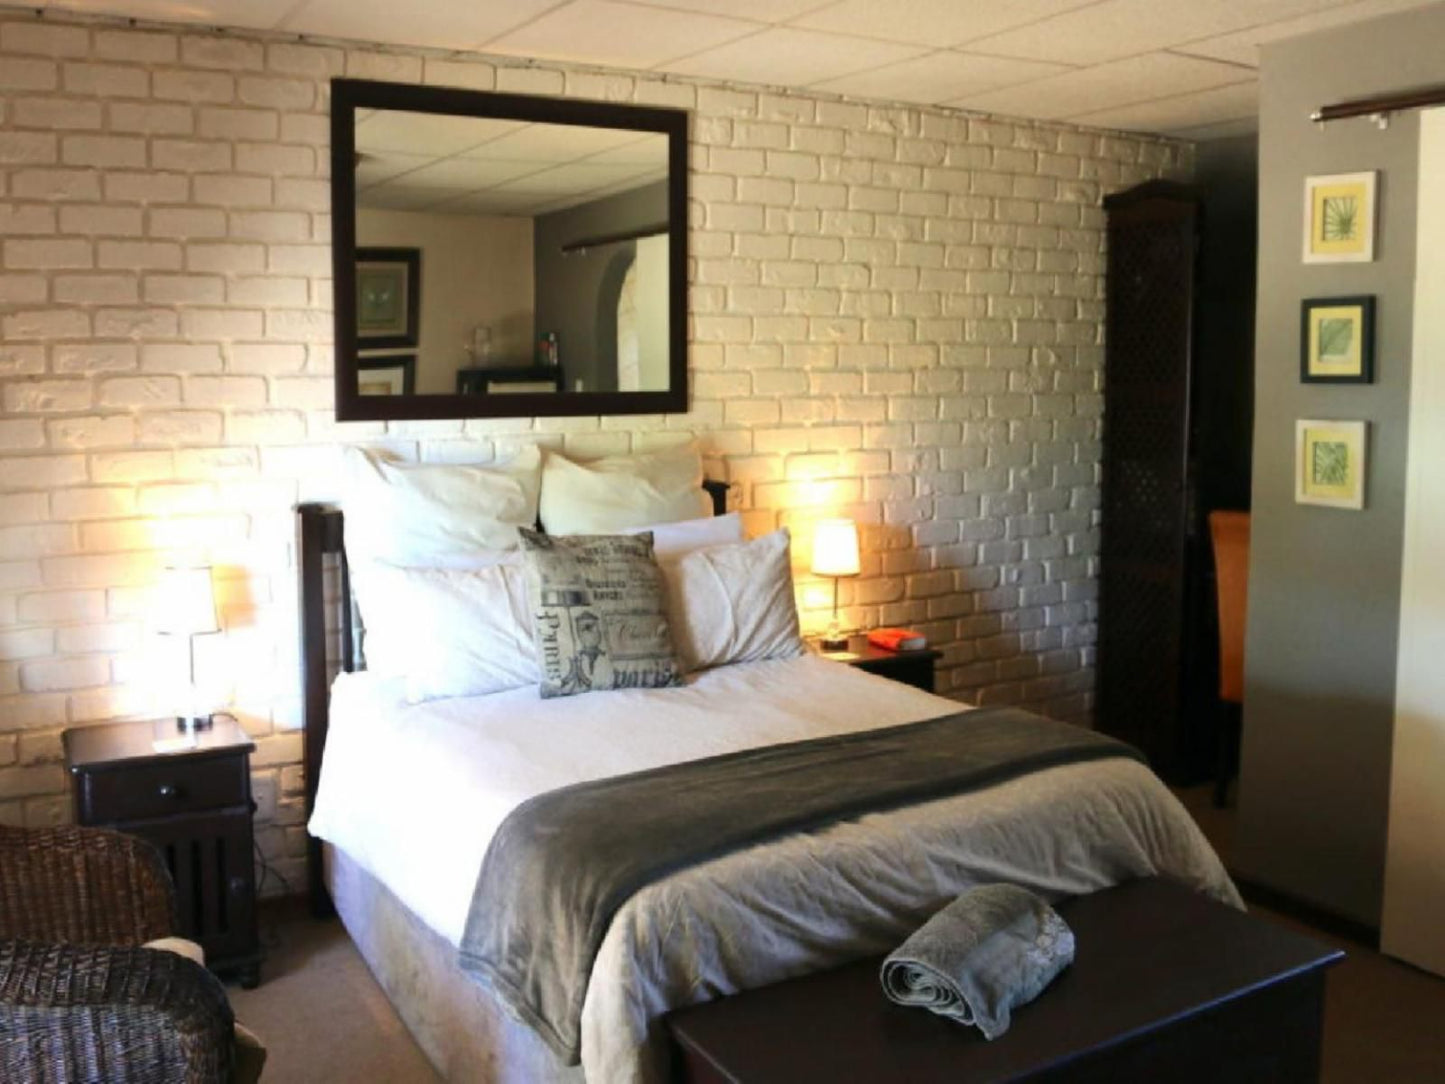 The Venue And Guest Rooms On Site Potchefstroom North West Province South Africa Bedroom, Brick Texture, Texture